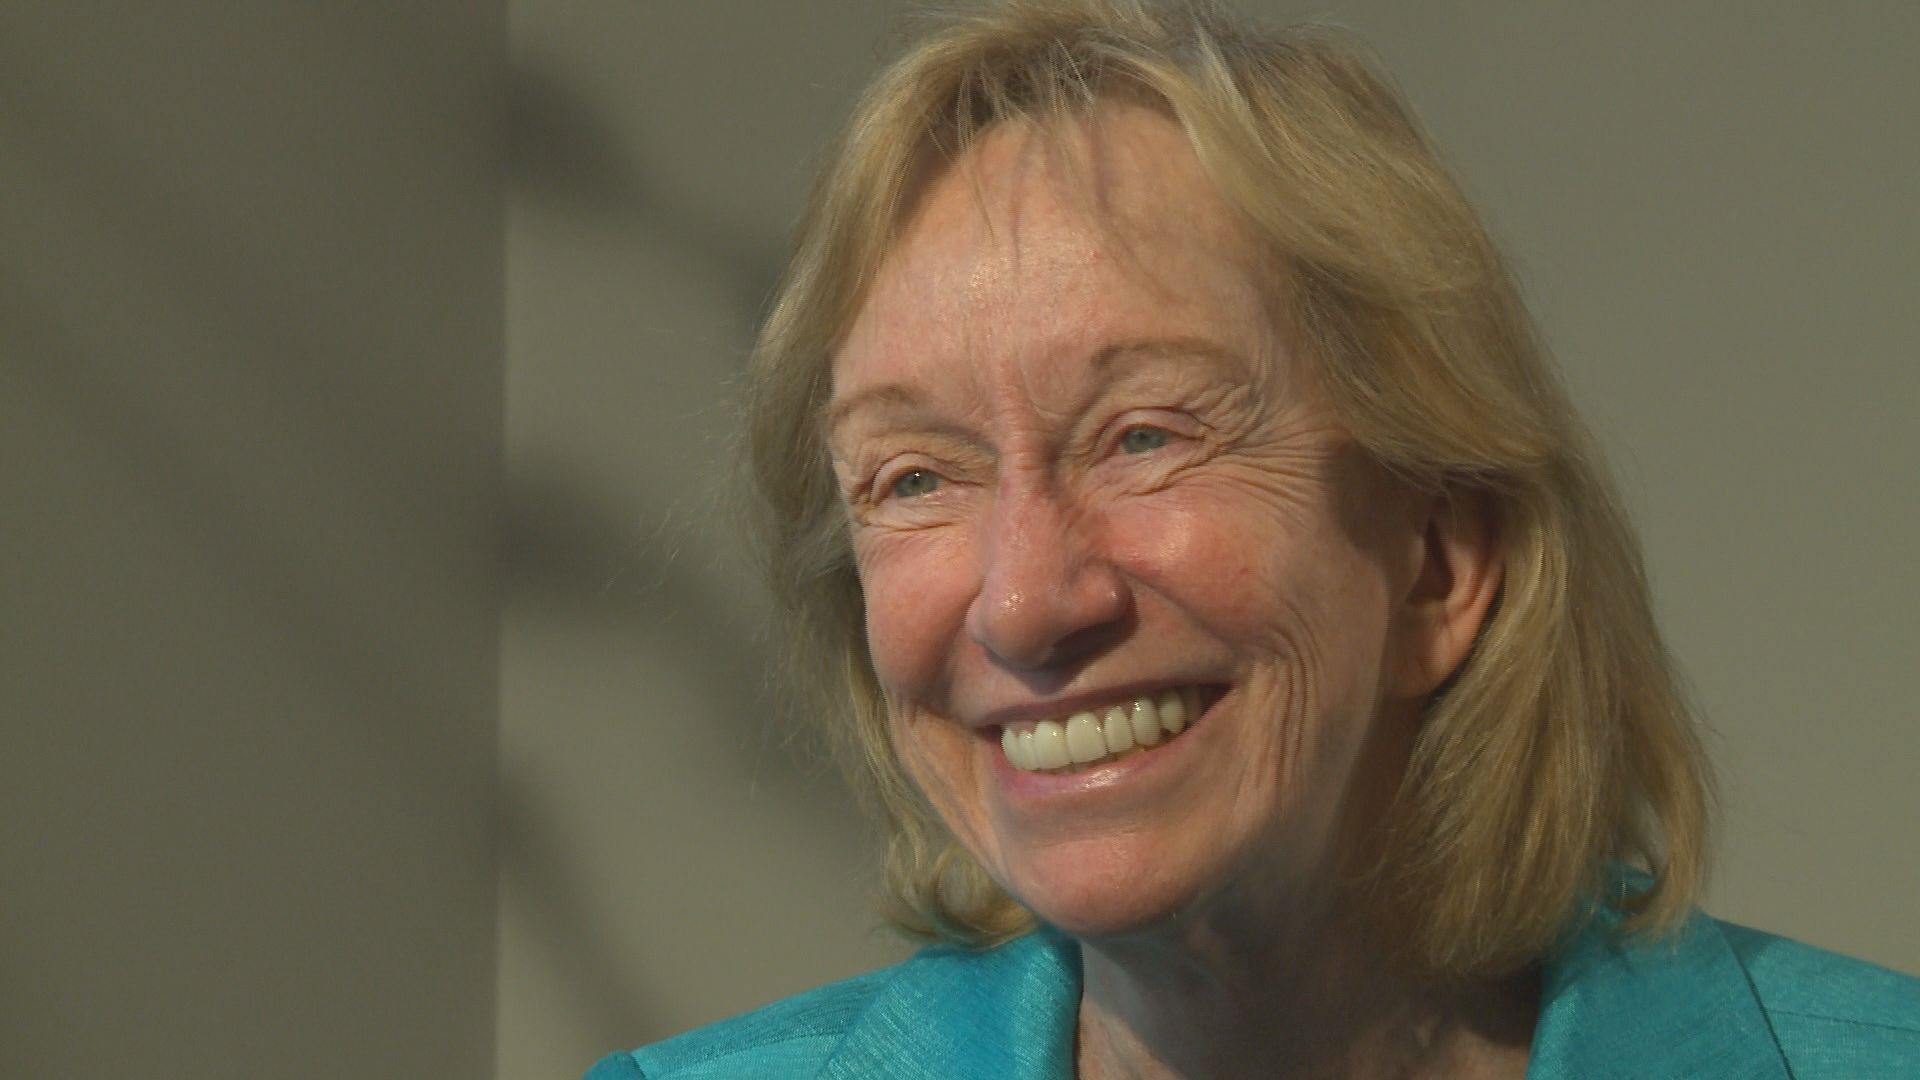 The passage of years makes it easier for Doris Kearns Goodwin to laugh ...